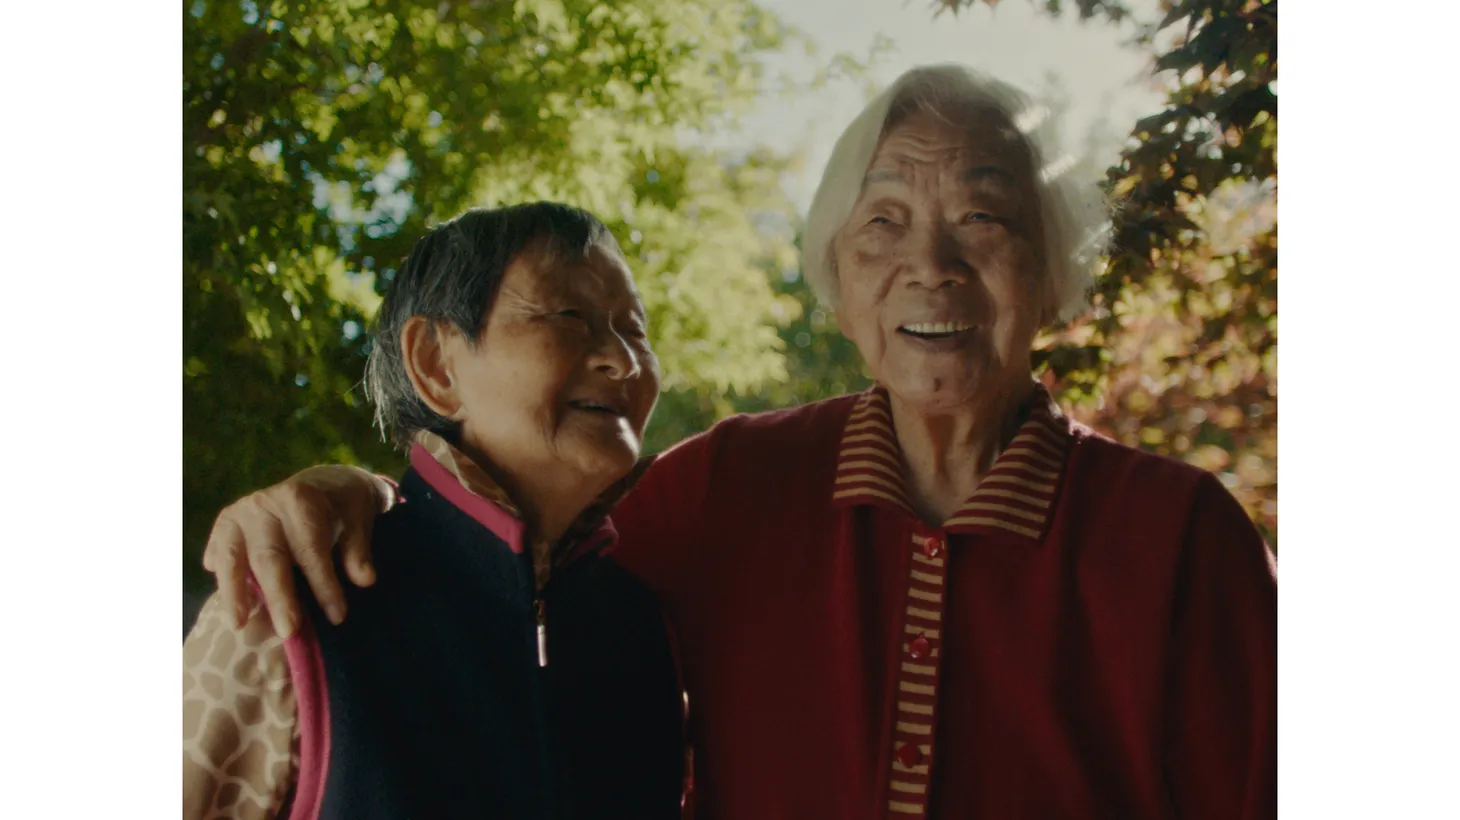 Chang Li Hua (left) and Yi Yan Fuei (right) are featured in the Oscar-nominated documentary “Nǎi Nai & Wài Pó.”